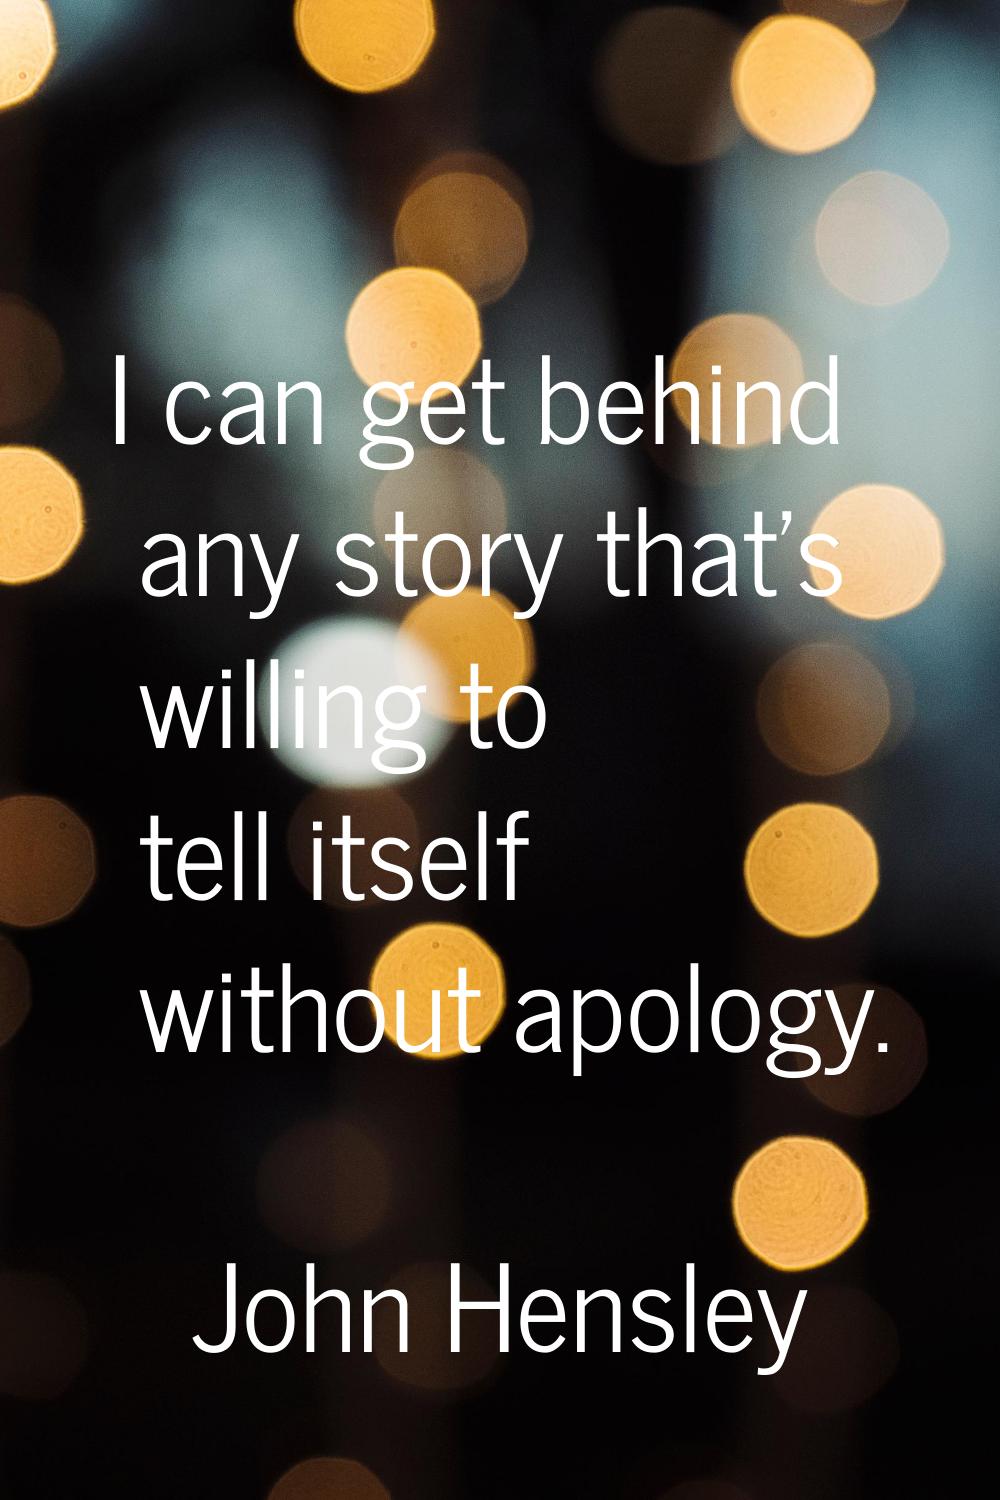 I can get behind any story that's willing to tell itself without apology.